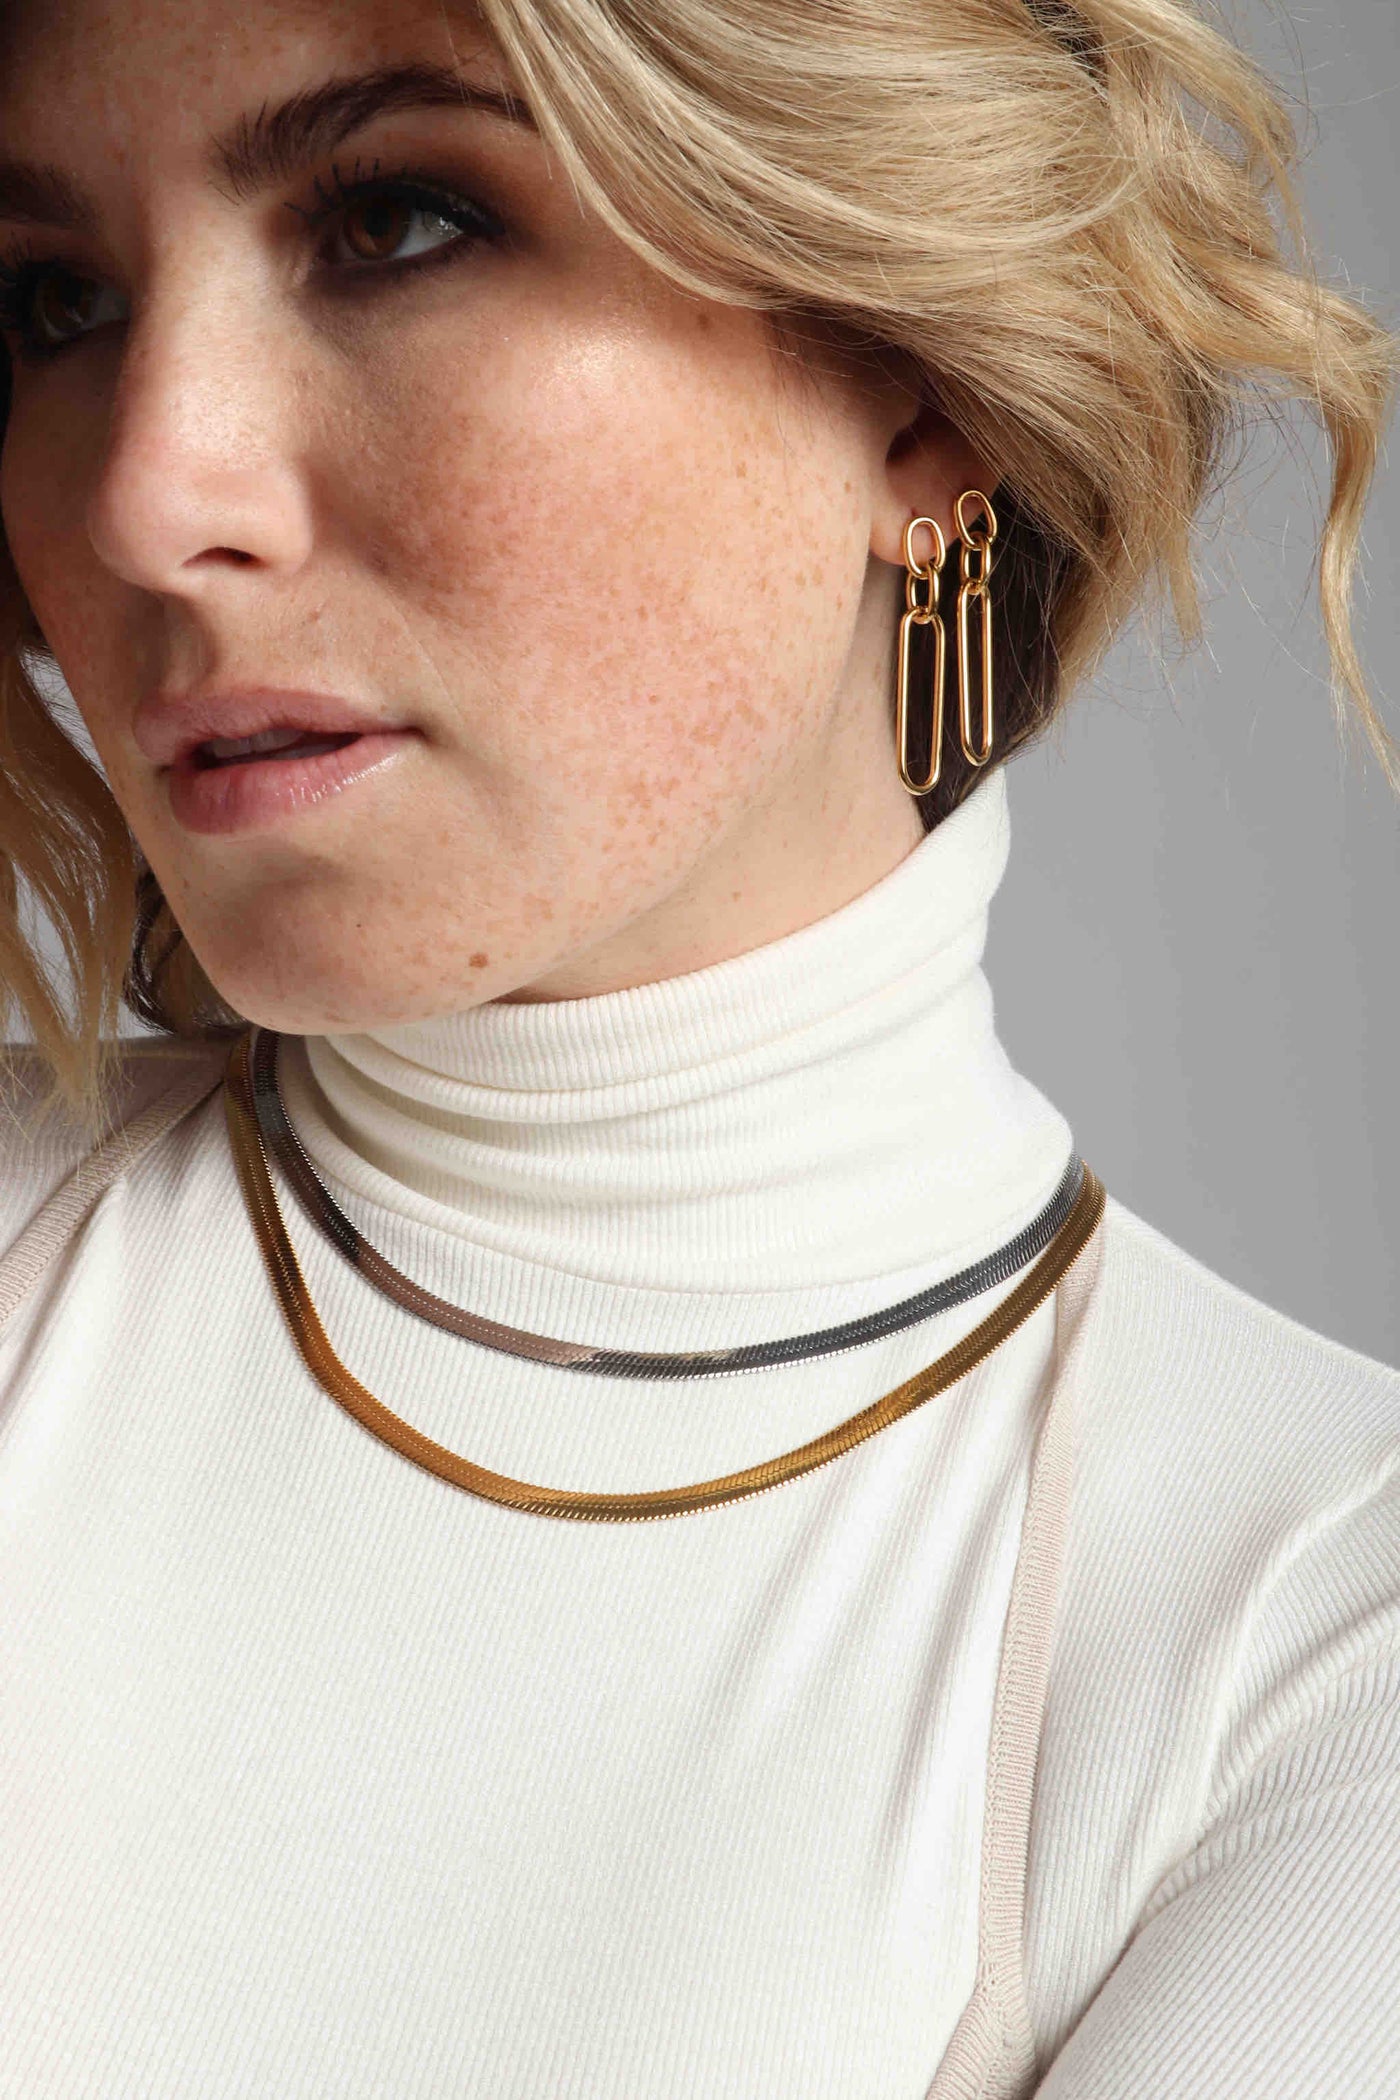 Mixing metals and chain link textures with the Marrin Costello Jewelry collection, featuring the multi oval chain link Mariposa Drops, 5mm vintage inspired classic herringbone Ramsey Chain in mixed metal, all made of polished or 14k gold plated hypoallergenic, water resistant, sustainable, non tarnish stainless steel, styled with a ribbed ivory turtleneck and a mauve ribbed string halter top